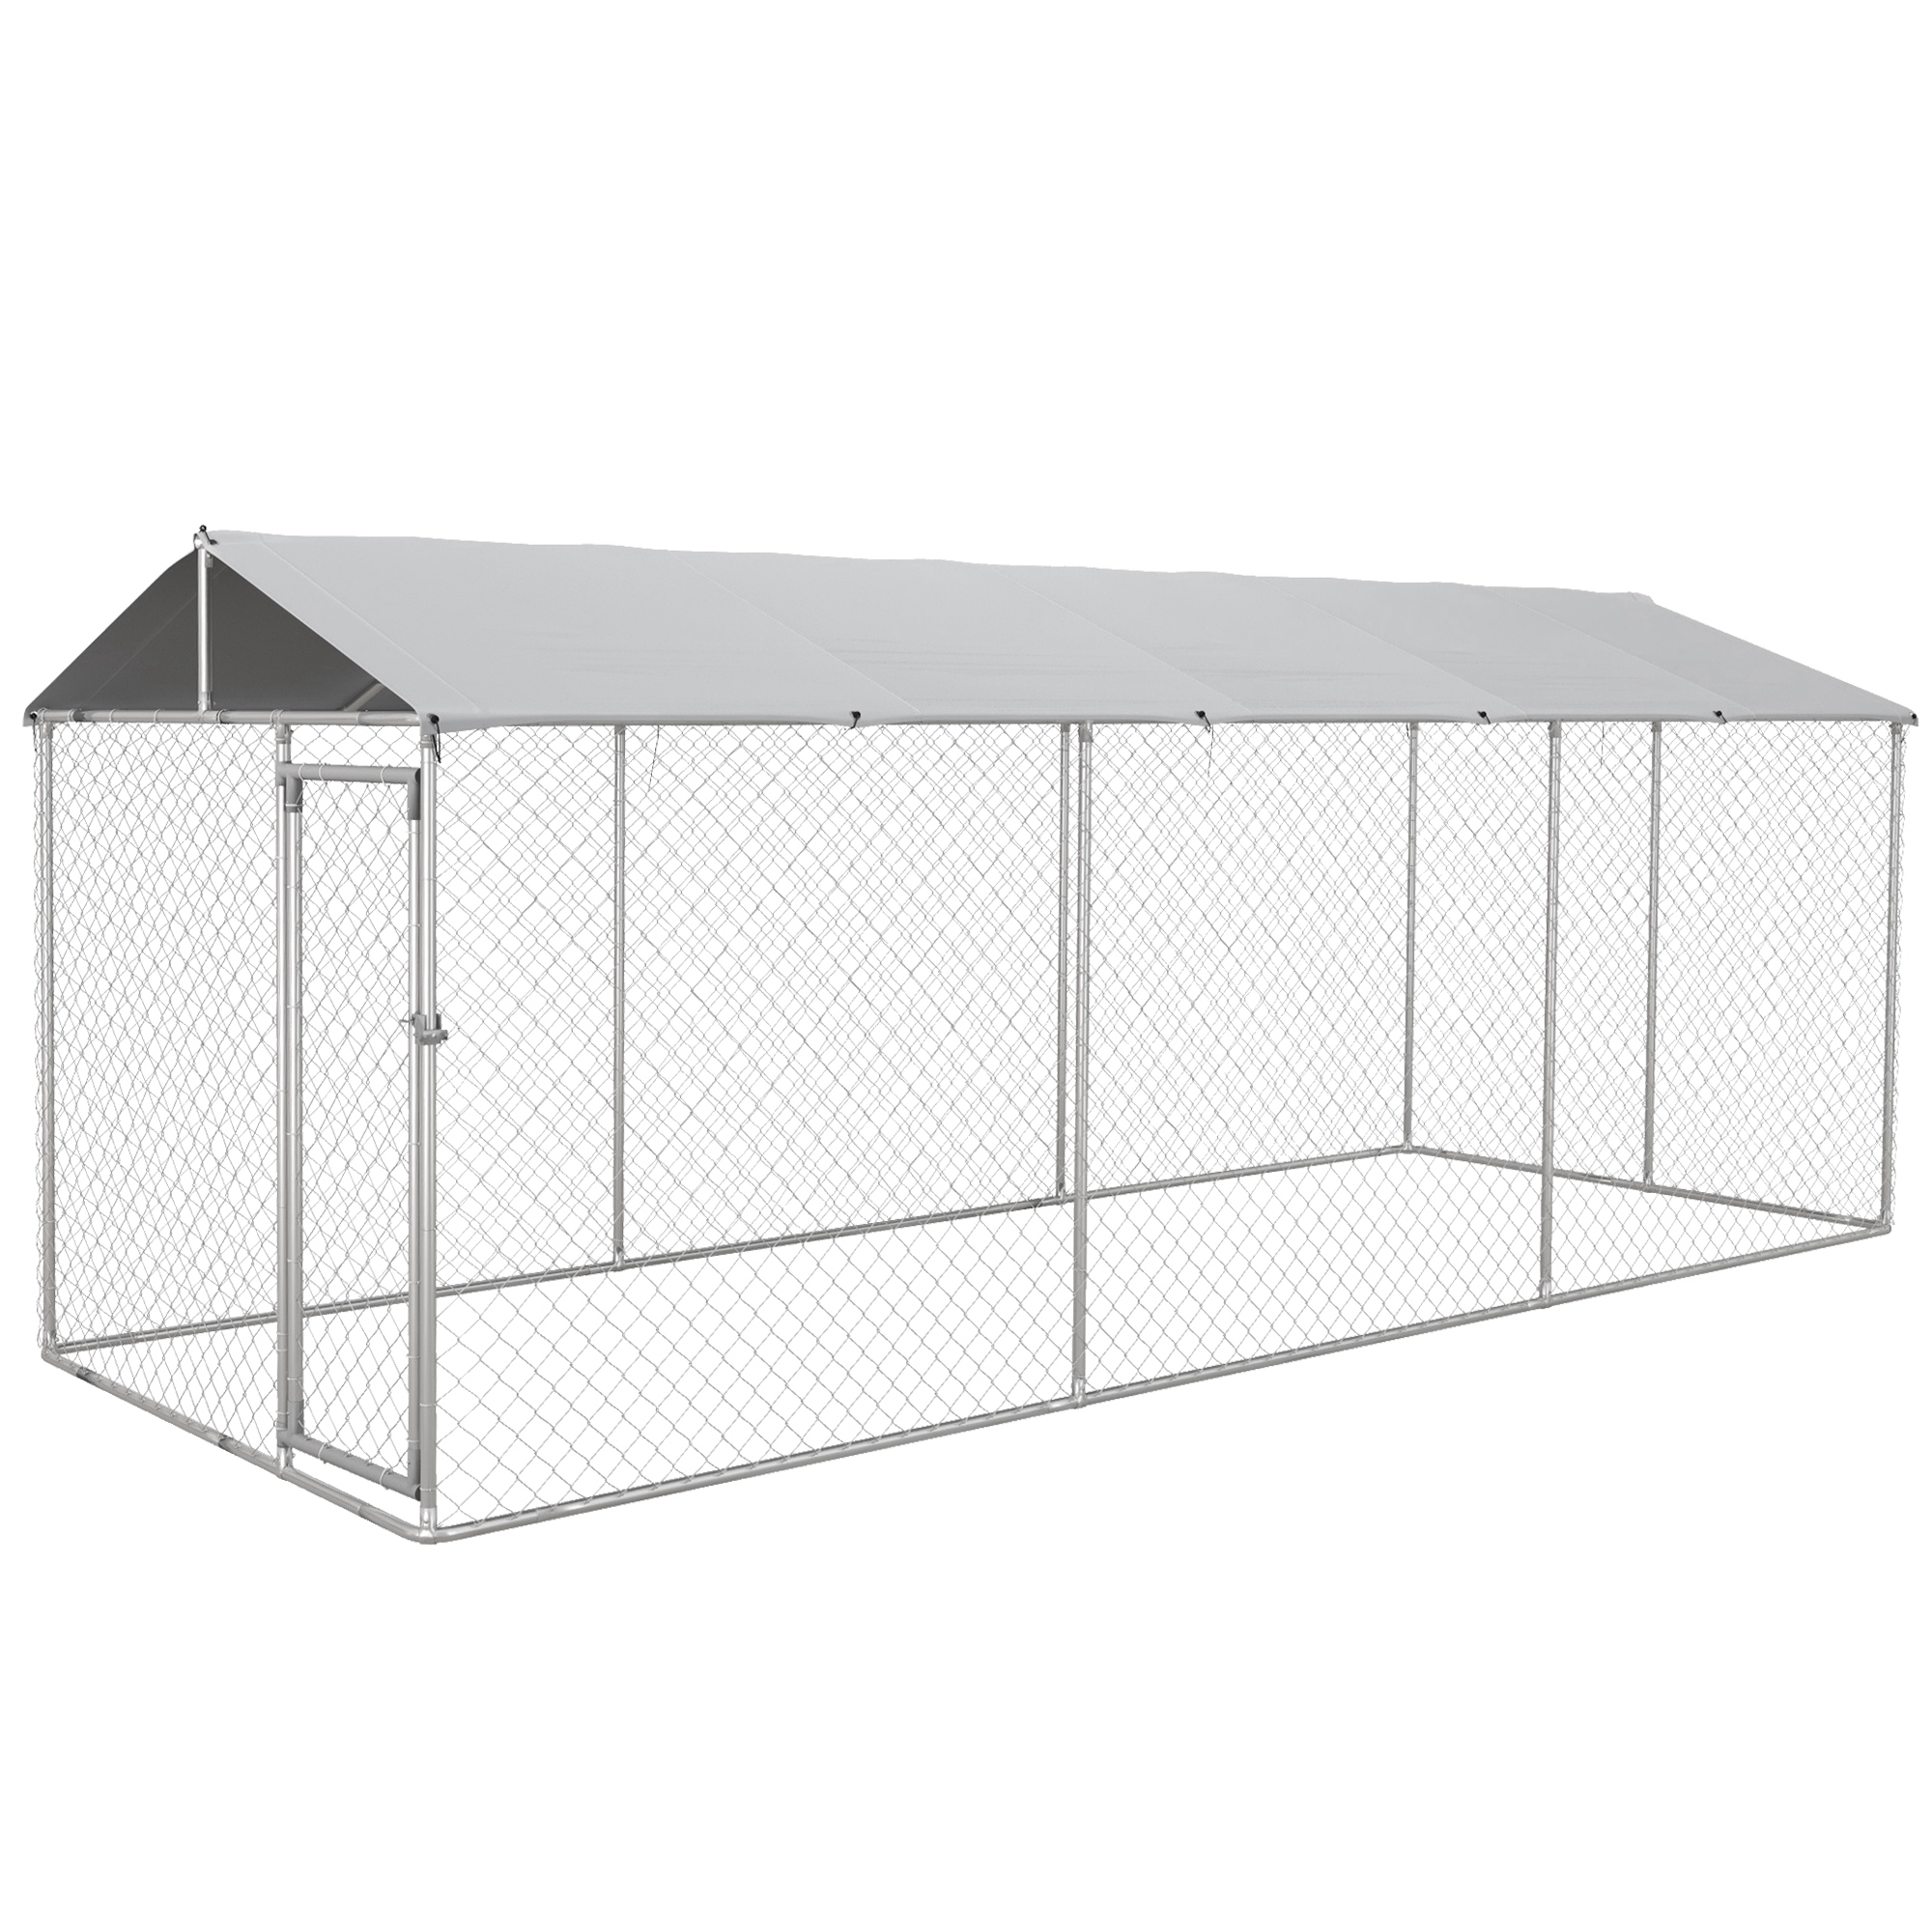 PawHut Outdoor Dog Kennel με αδιάβροχη οροφή από ύφασμα και ατσάλι Oxford